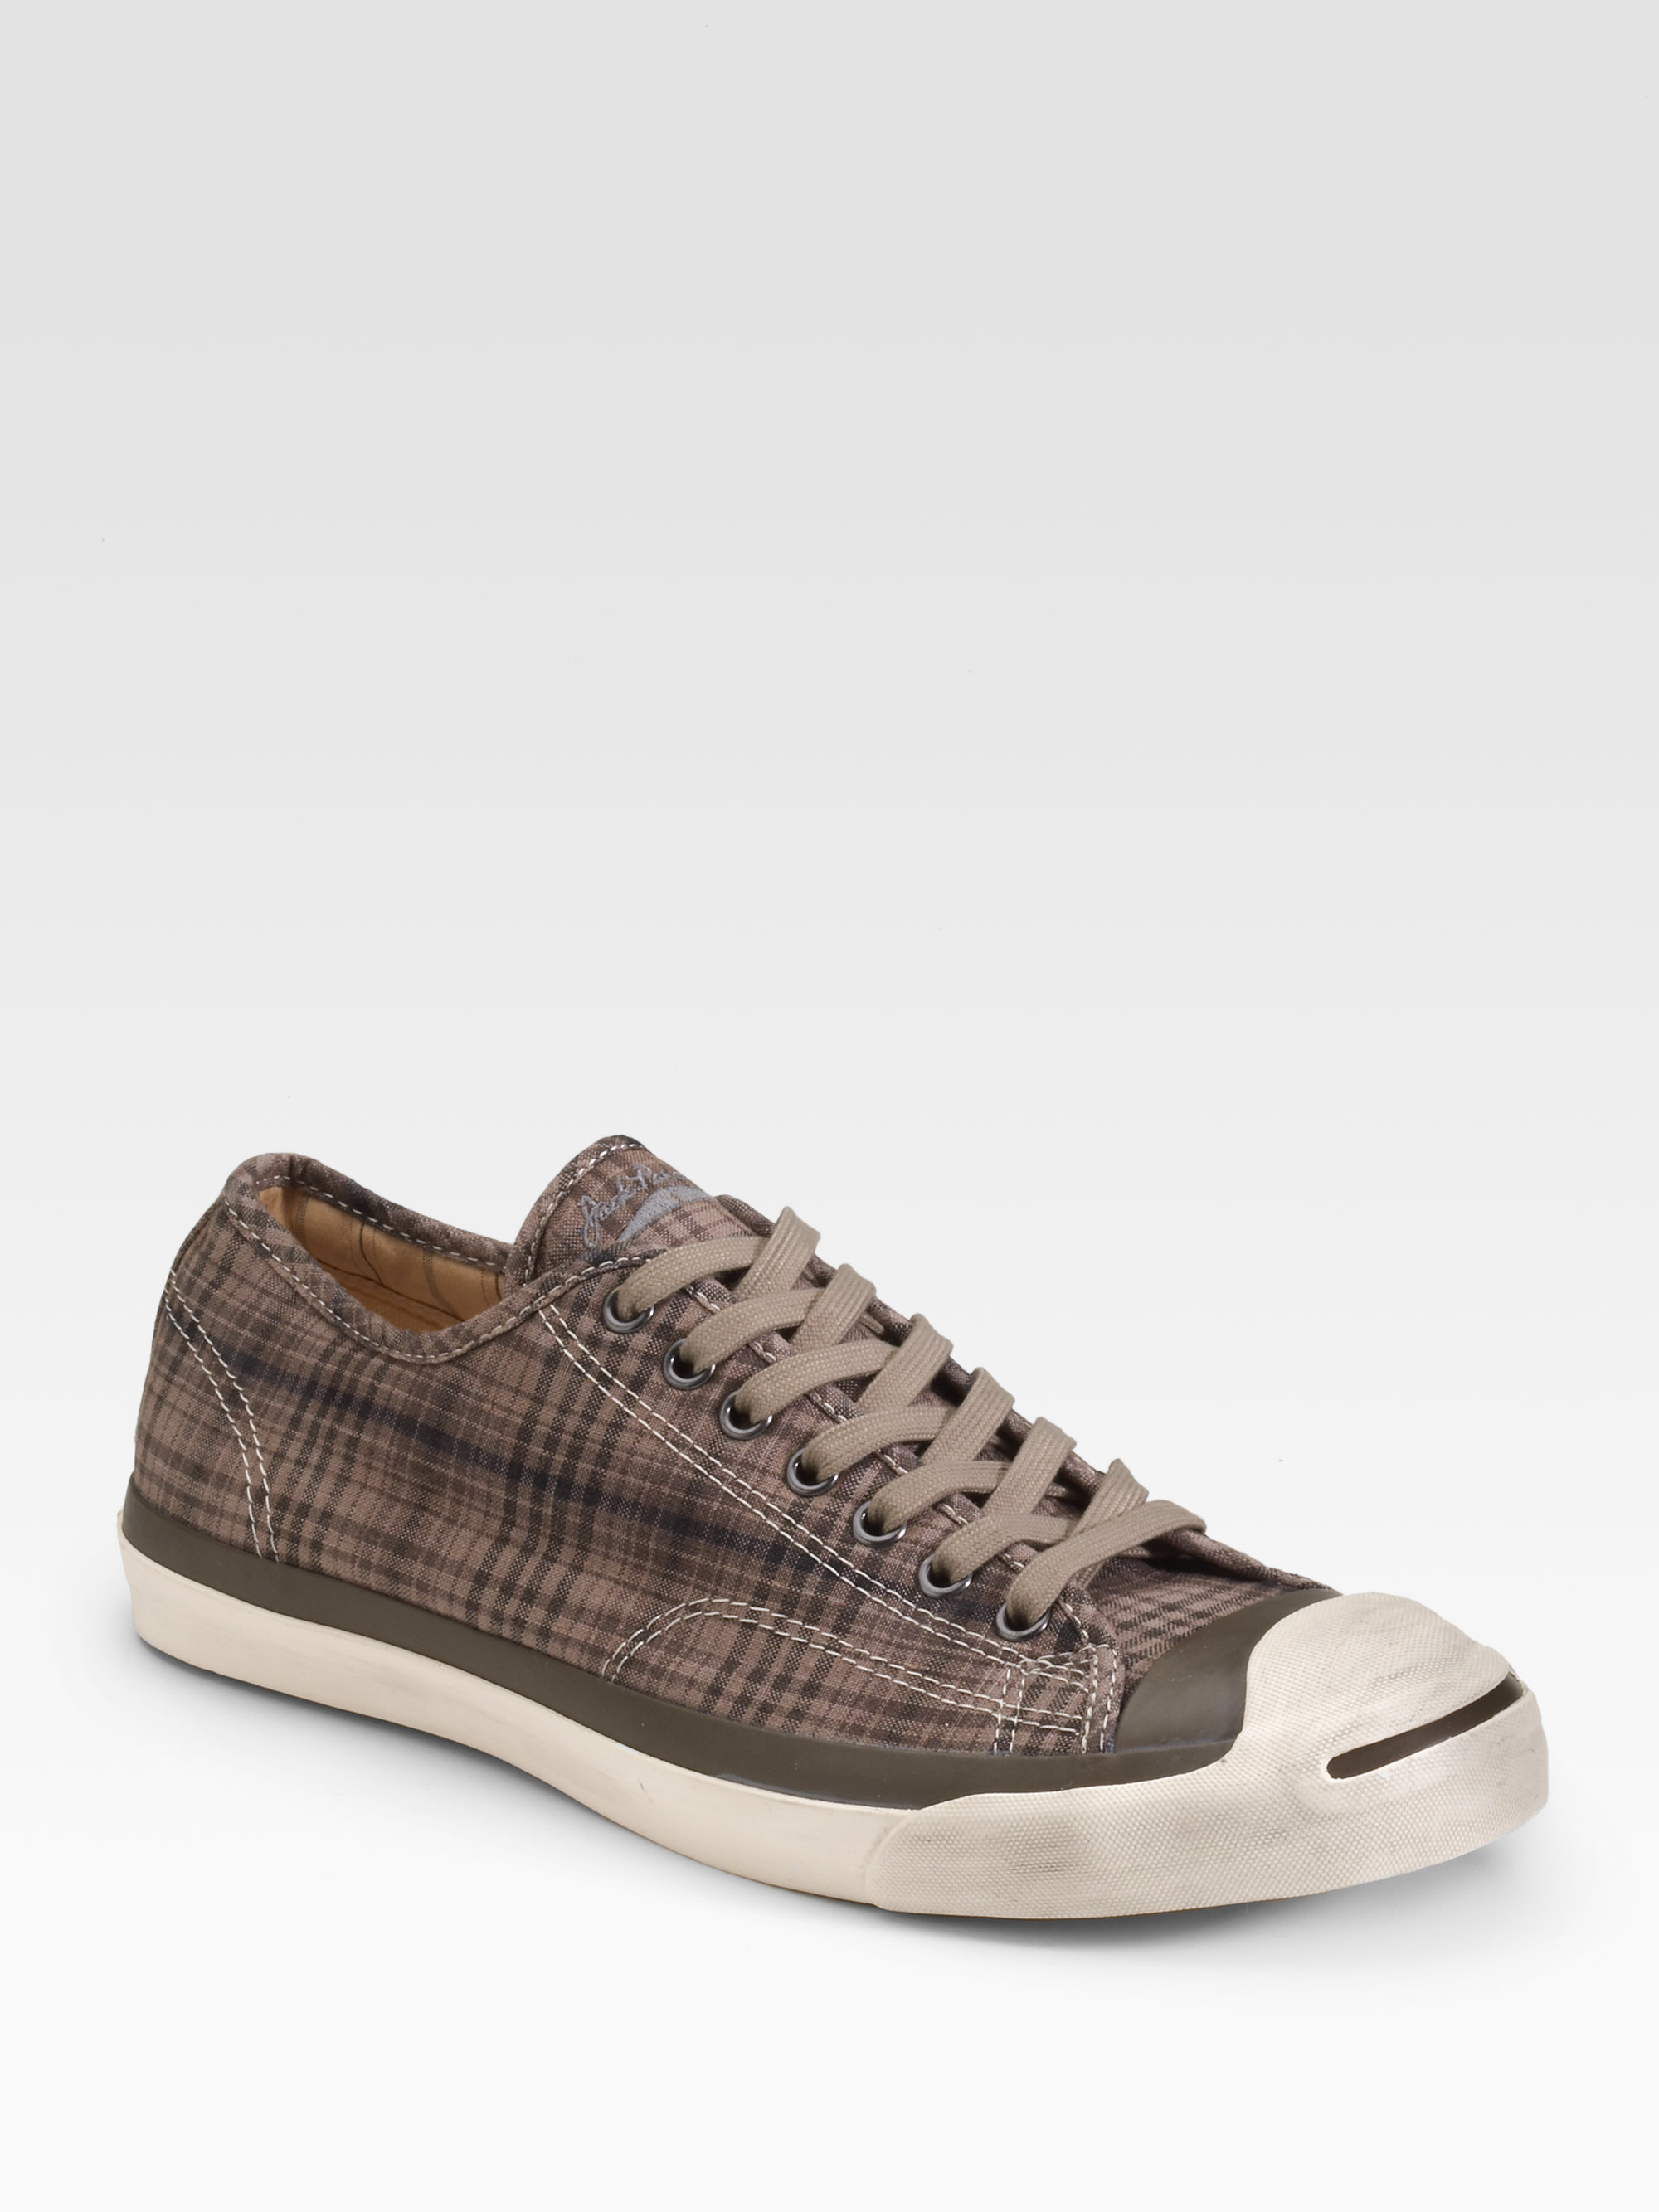 Jack Purcell Vintage Ox 82